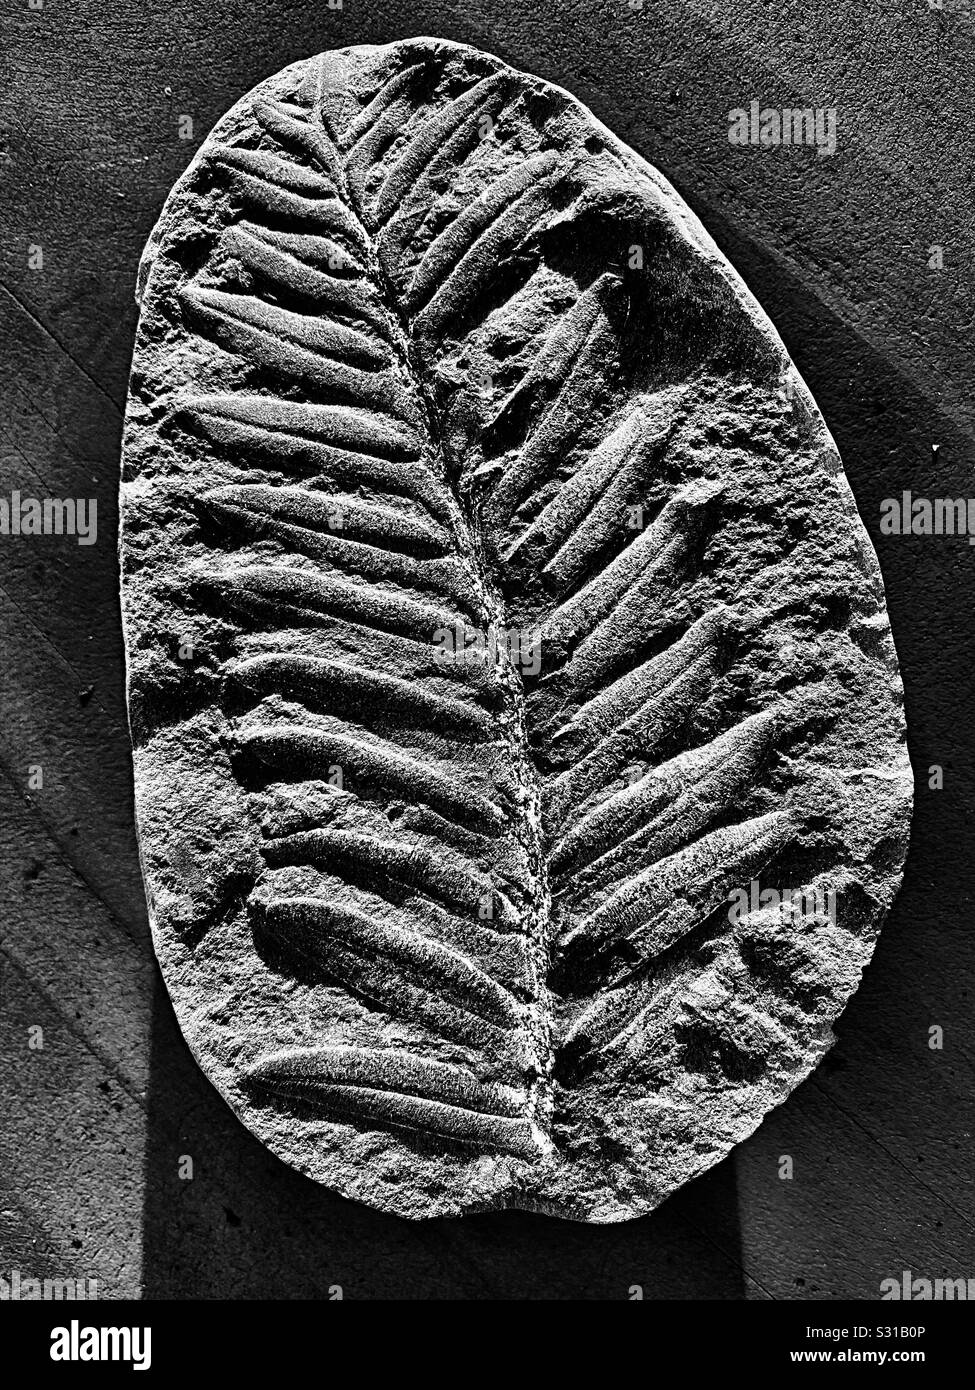 Fern fossil in black and white Stock Photo